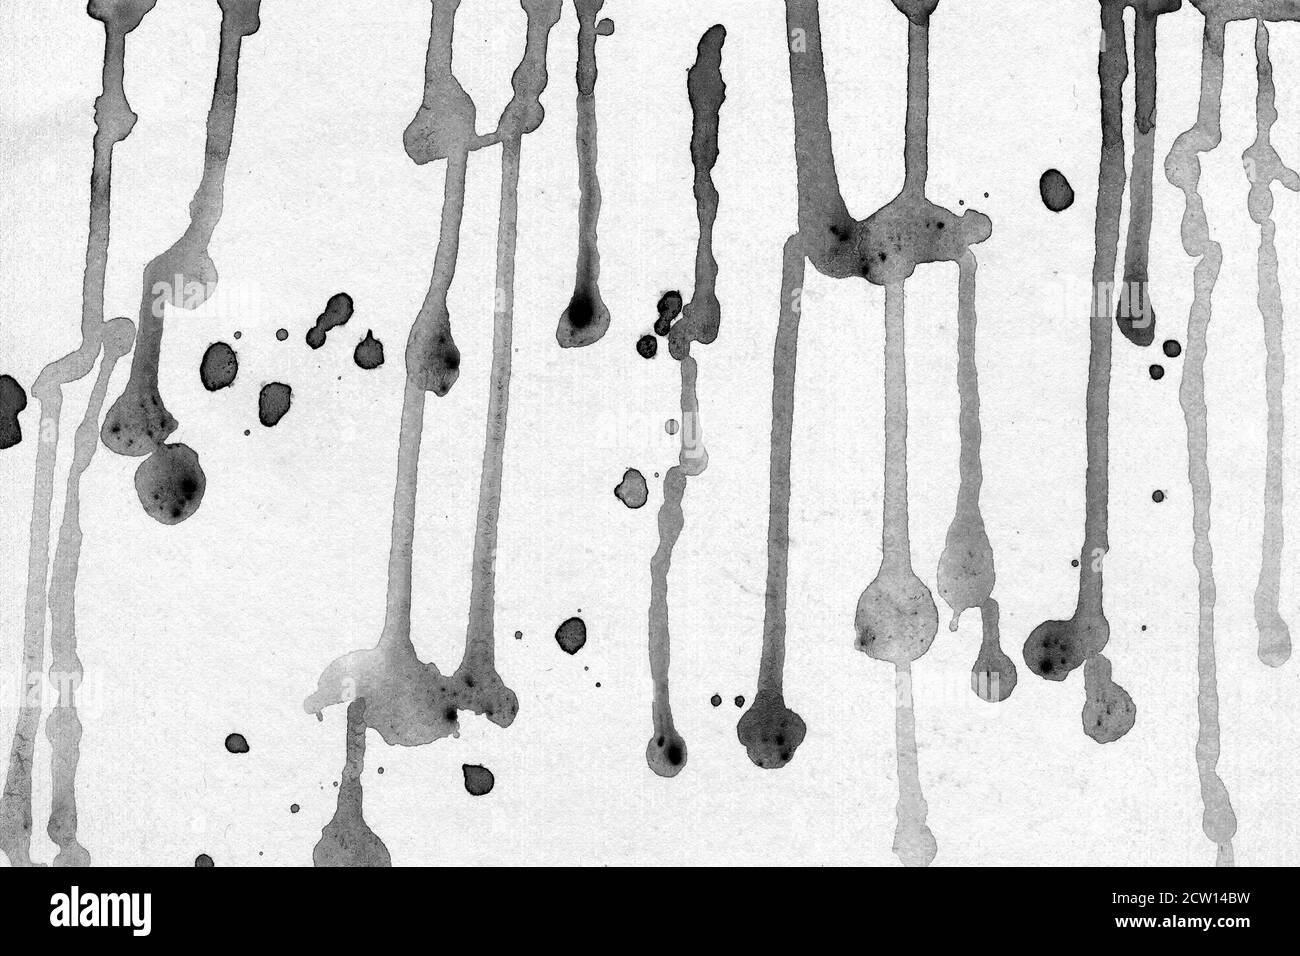 Hand painted watercolor falling liquid drops texture isolated on white background. Stock Photo